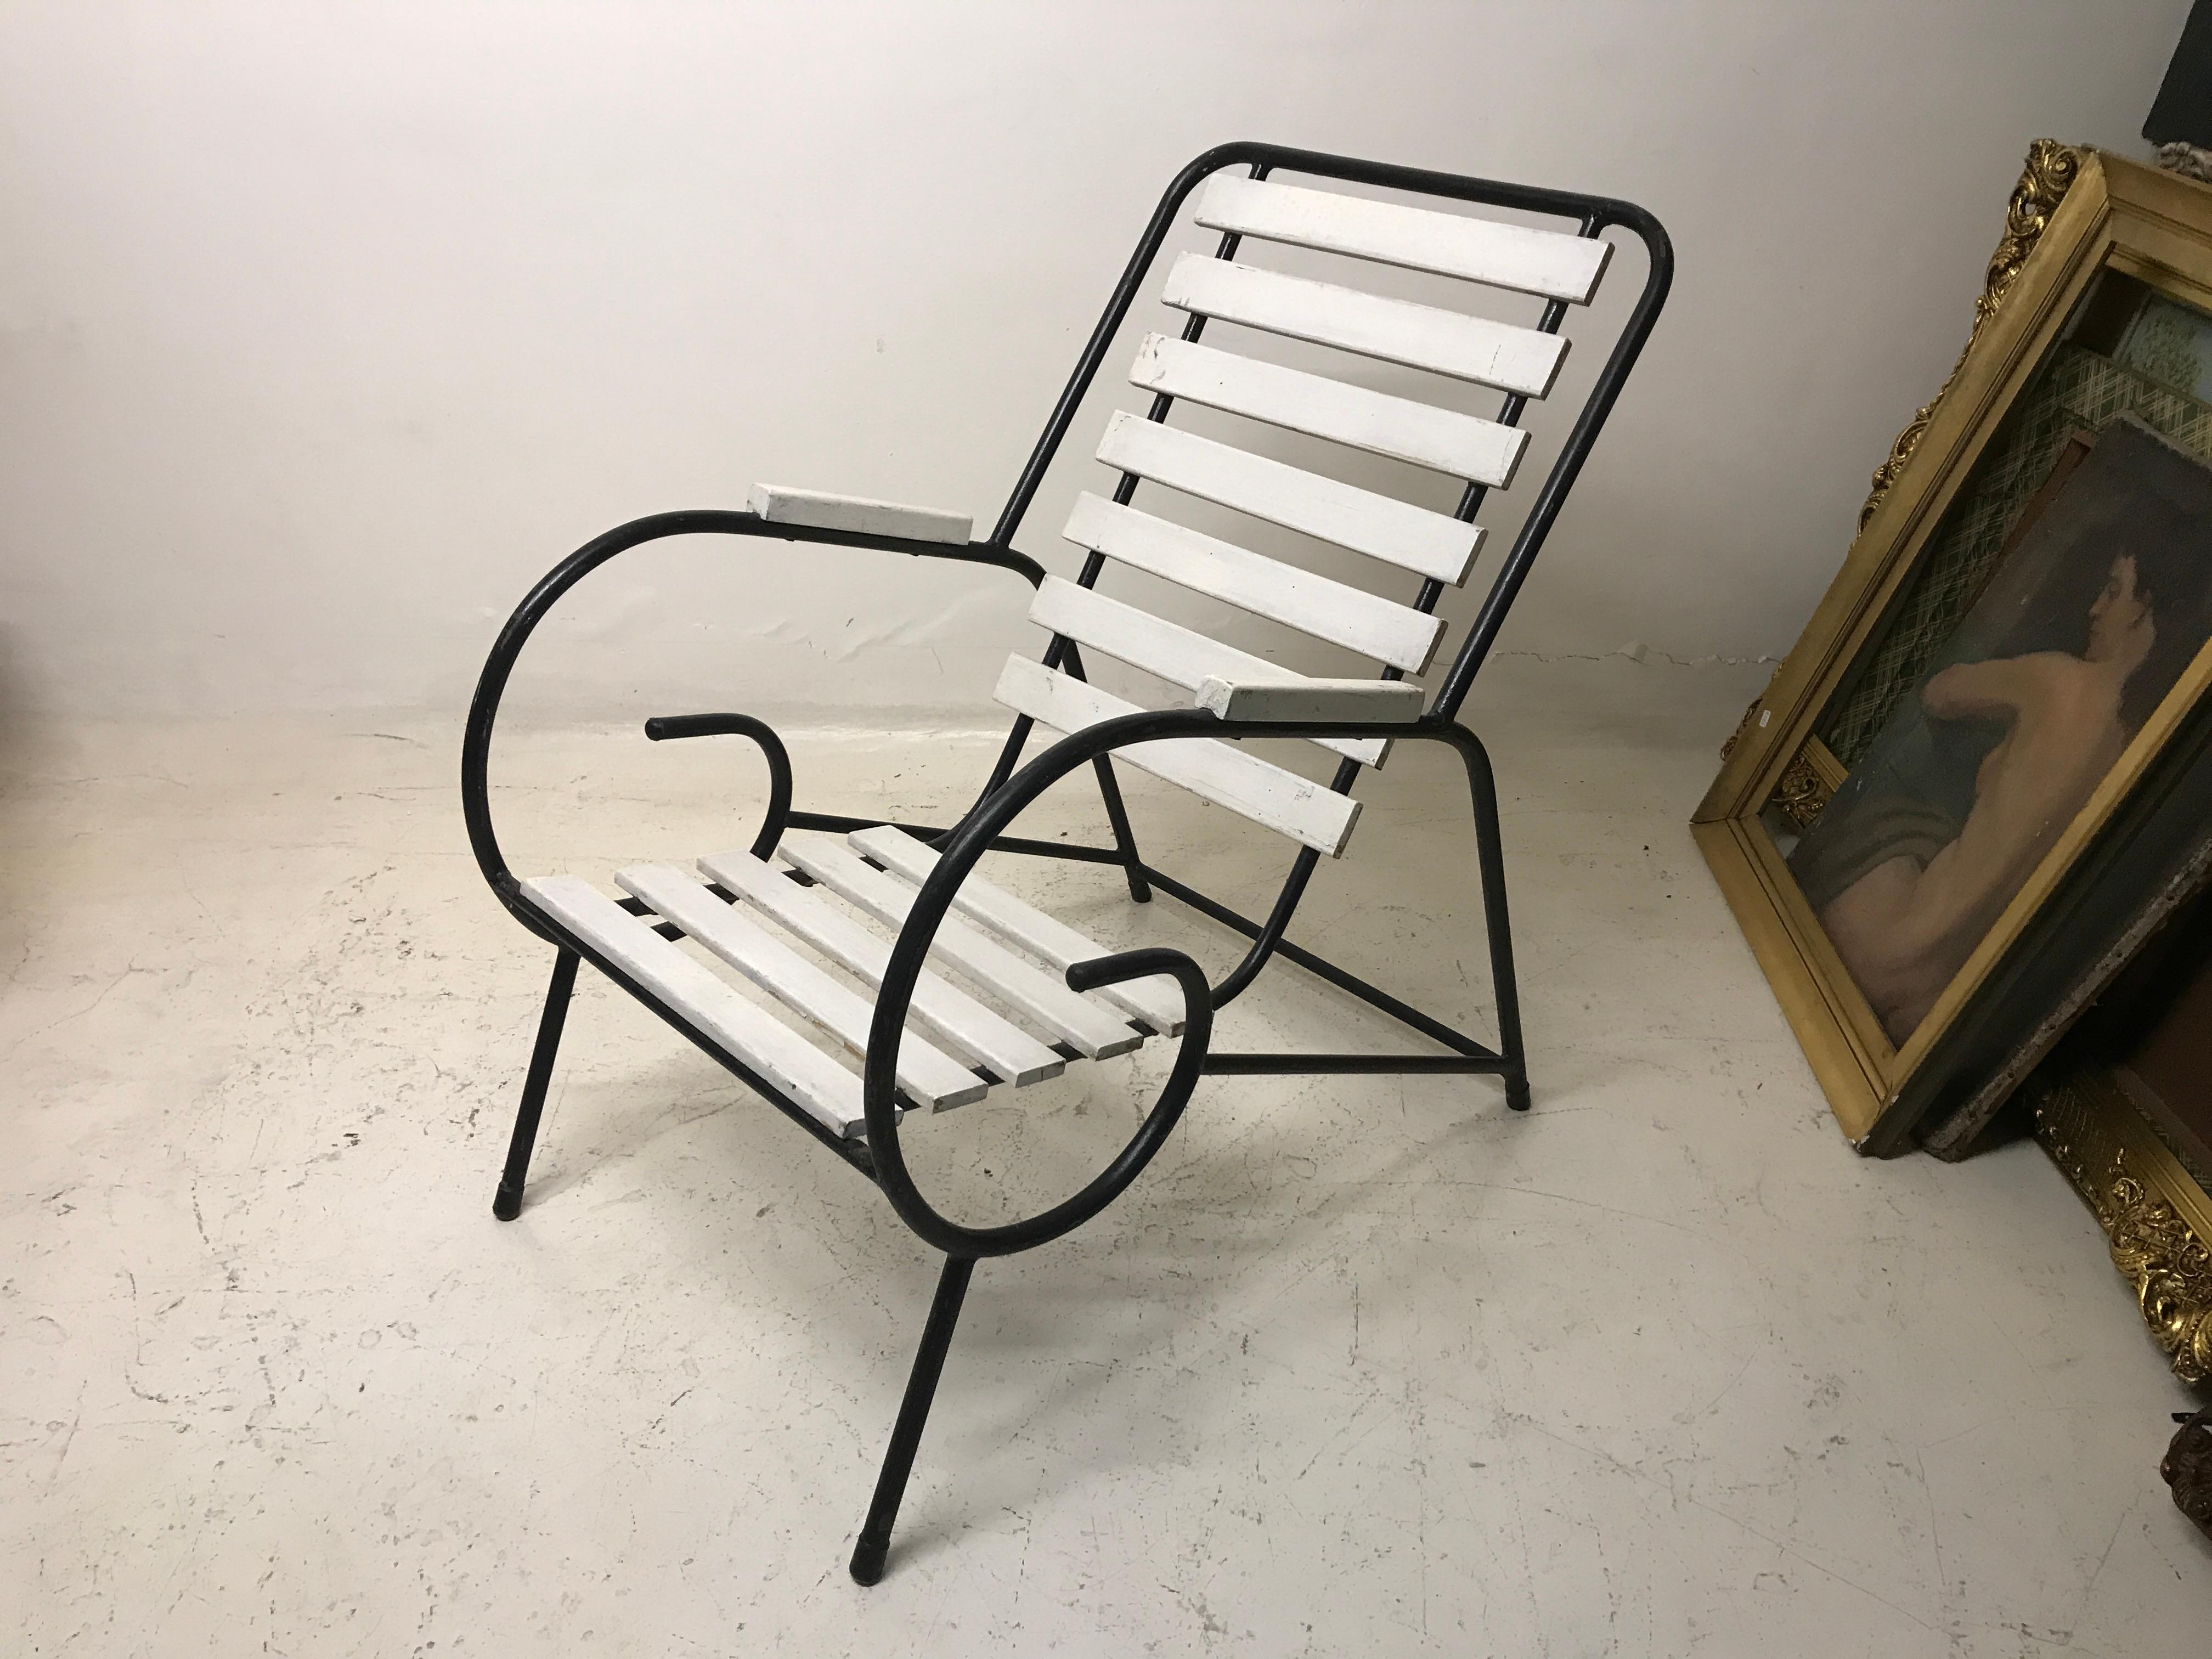 8 armchairs

We have specialized in the sale of Art Deco and Art Nouveau and Vintage styles since 1982. If you have any questions we are at your disposal.
Pushing the button that reads 'View All From Seller'. And you can see more objects to the